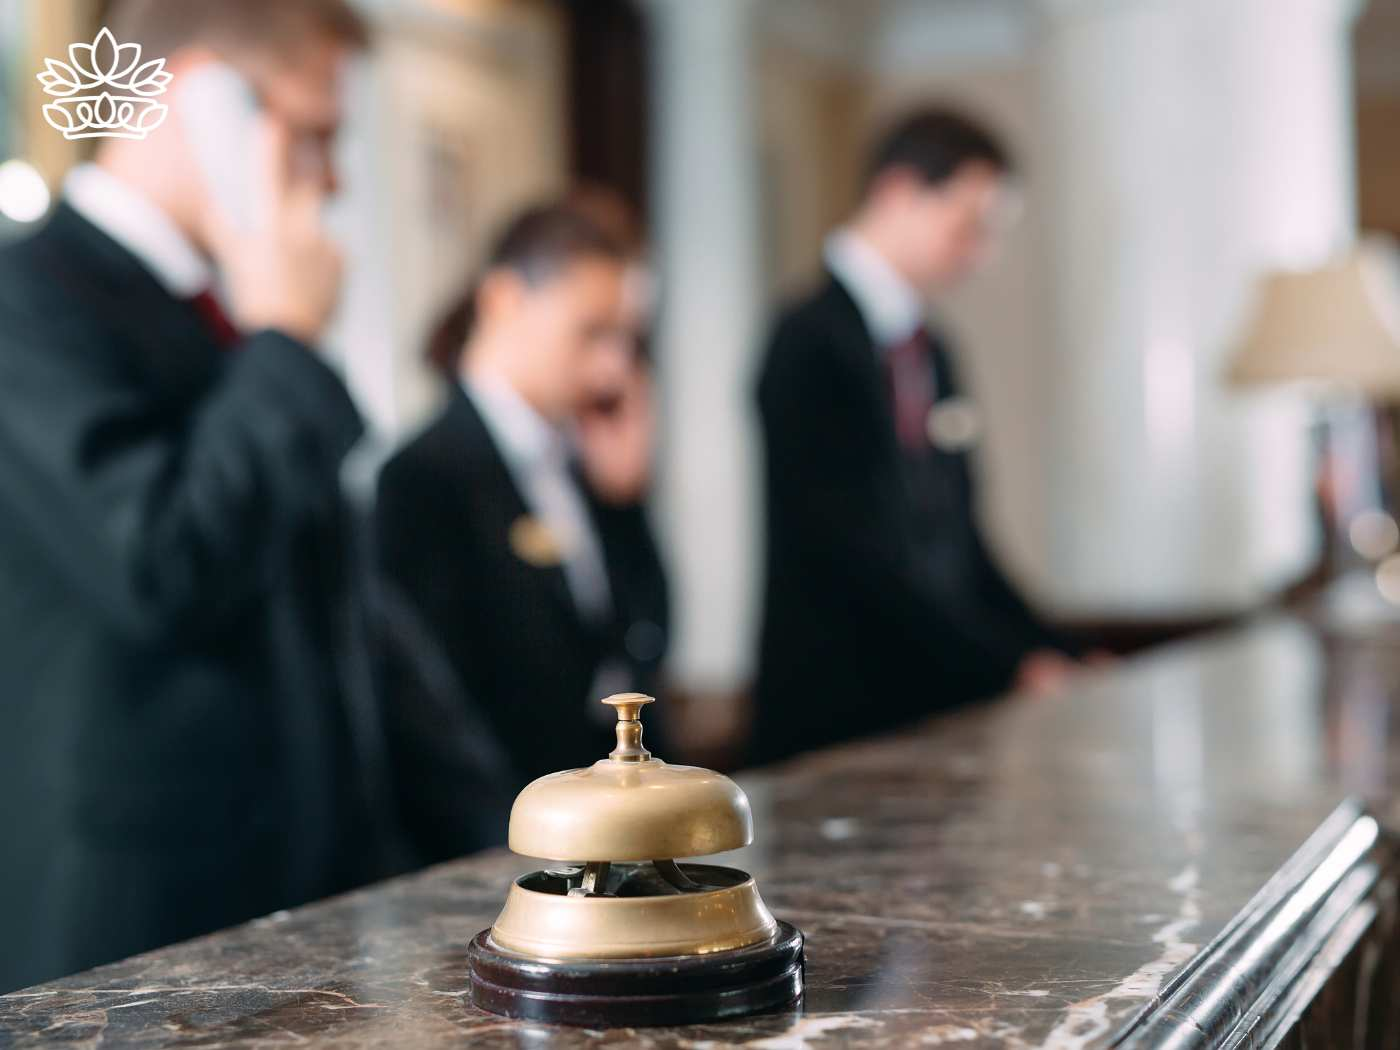 Focused scene at a luxury hotel reception with staff members actively engaged in service. One concierge speaks on the phone, another assists a guest, and a third attentively manages paperwork. In the foreground, a classic brass service bell sits on the marble countertop, ready to summon assistance. Fabulous Flowers and Gifts for Guest House and Hotel Flowers